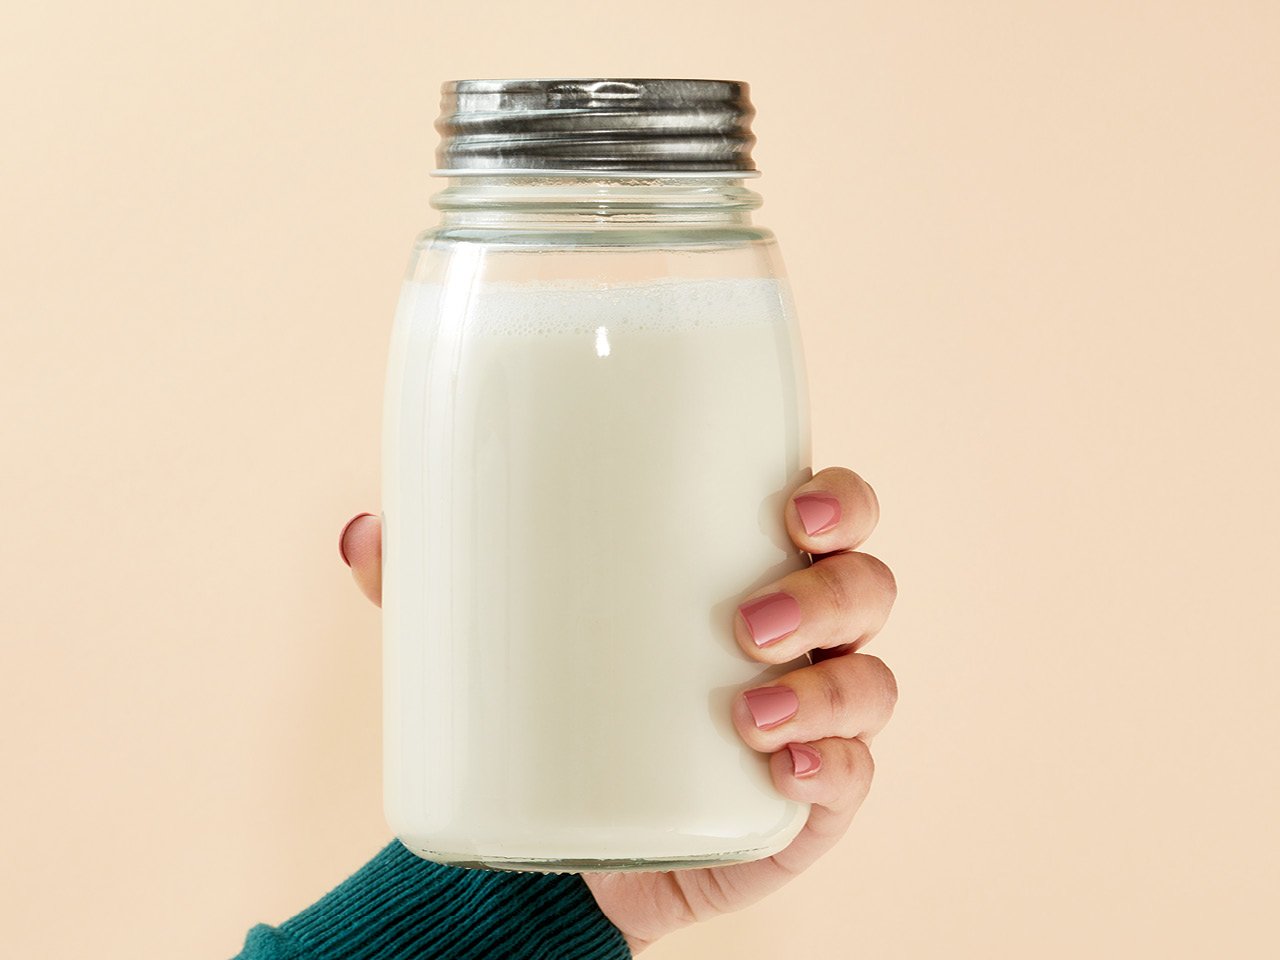 Nut milk recipes: A person's hand holding a mason jar filled with nut milk 